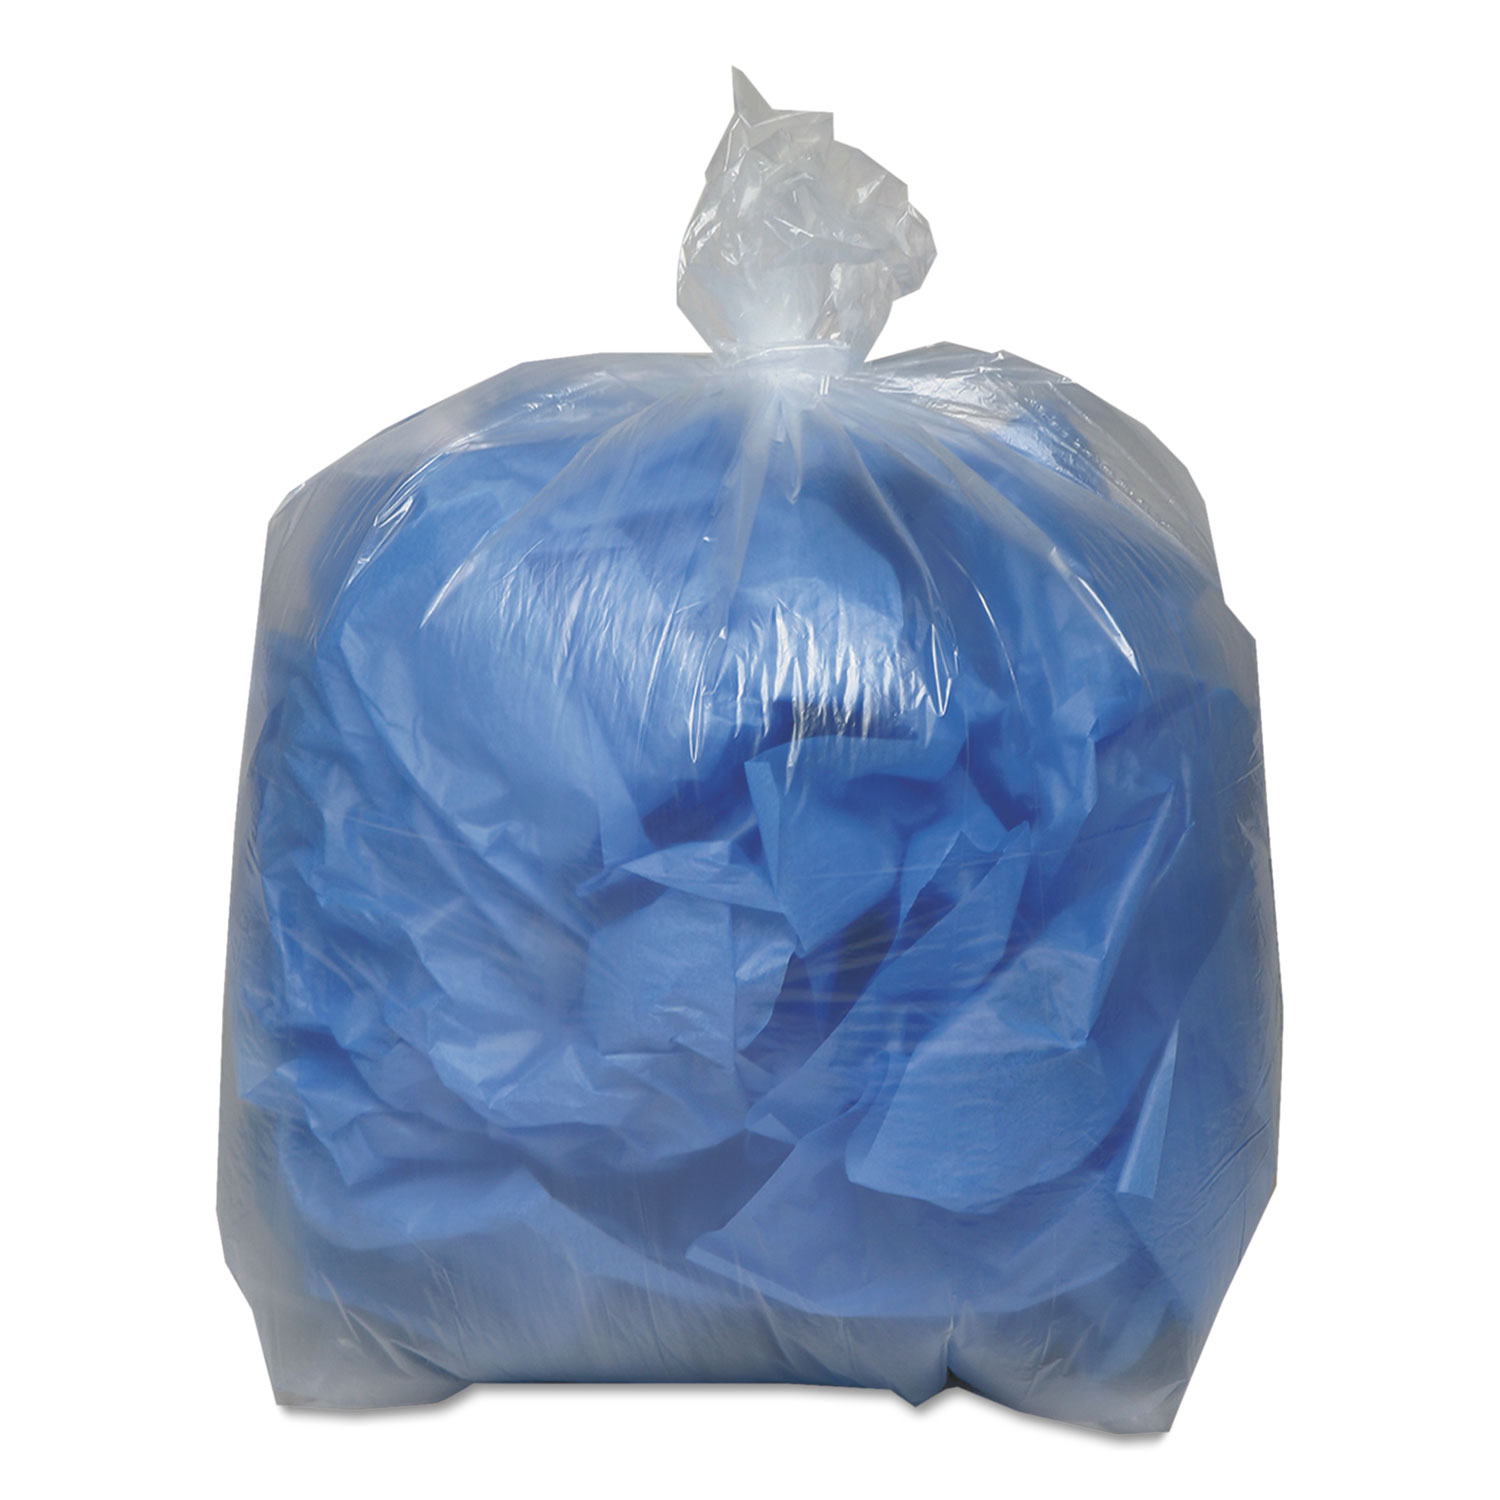 Low Density Repro Can Liners, 1.1 Mil, 56 gal, 43 x 47, 10 Bags/RL, 10 Rolls/CT